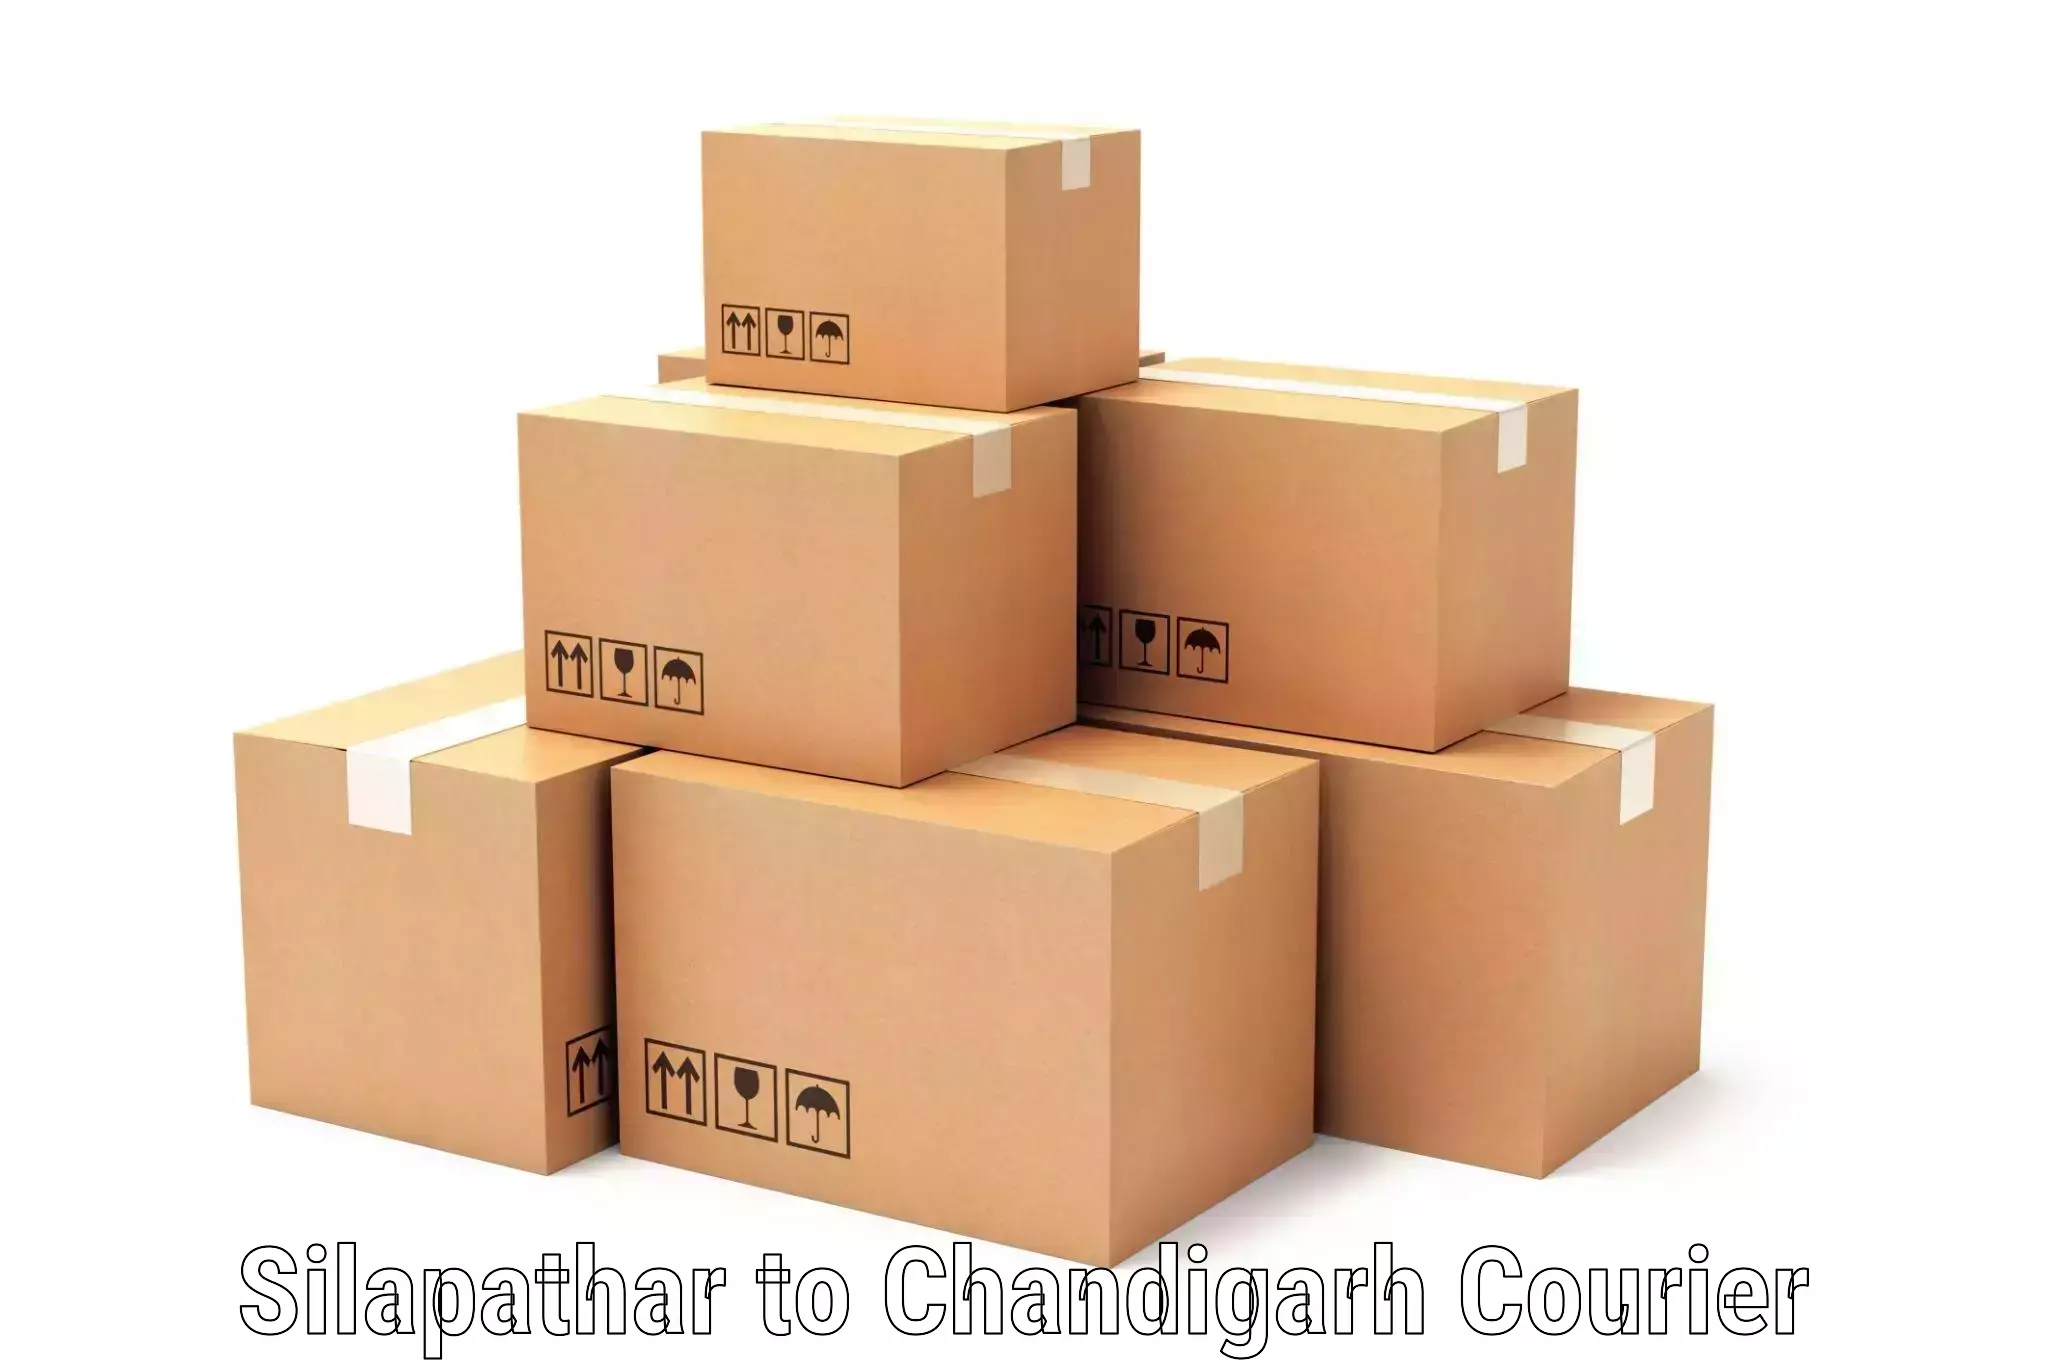 Global courier networks Silapathar to Panjab University Chandigarh